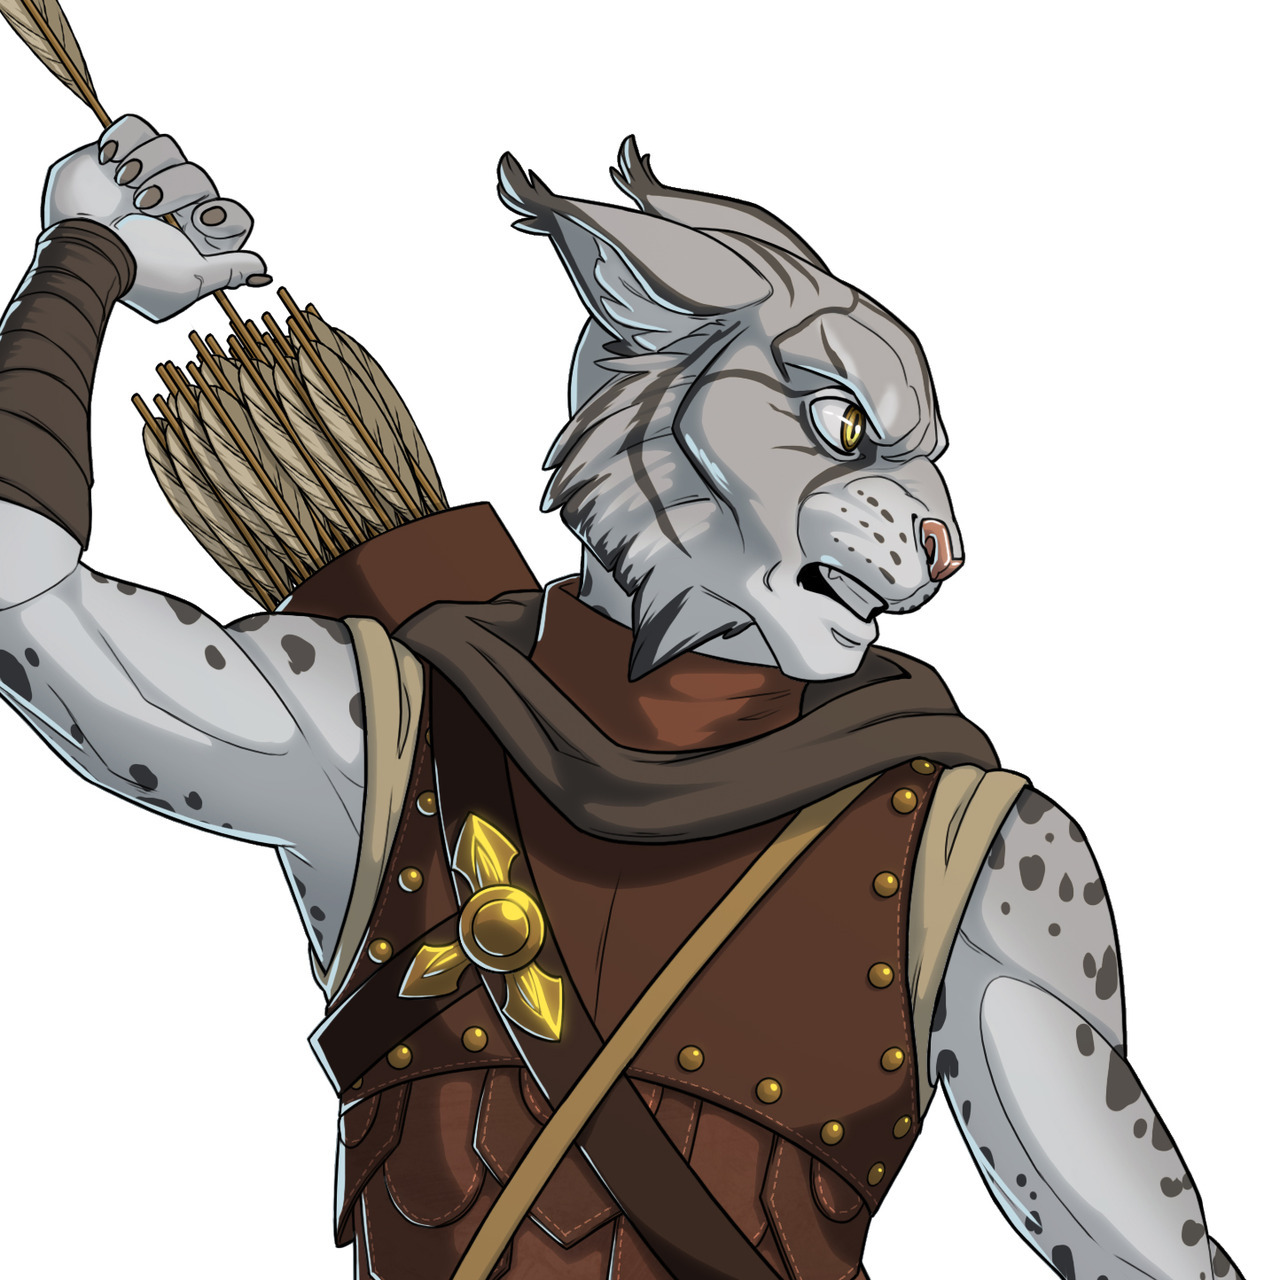 Pettifog Draws Things - So Here’s River The Tabaxi Fighter Though My.